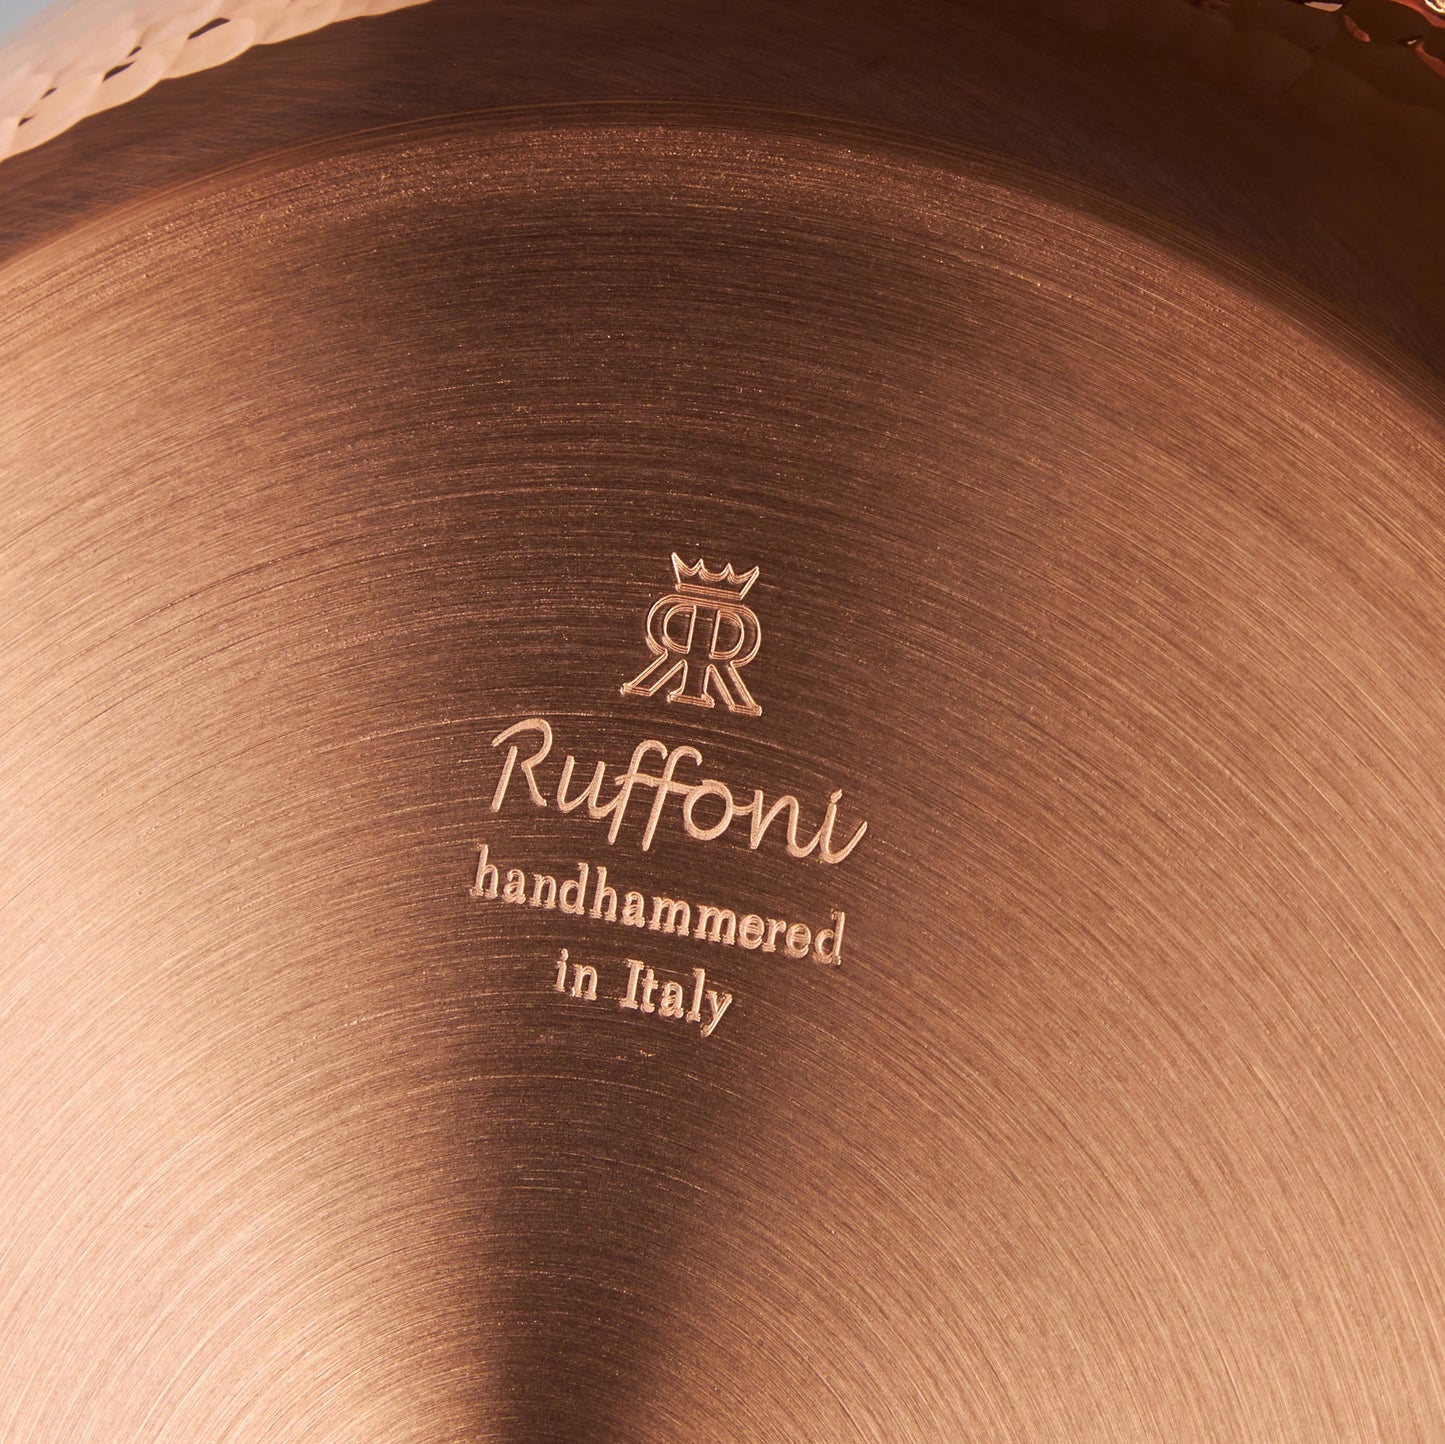 Ruffoni Made in Italy brand logo stamped under Opus Cupra copper 4 qt chef's pan for authenticity